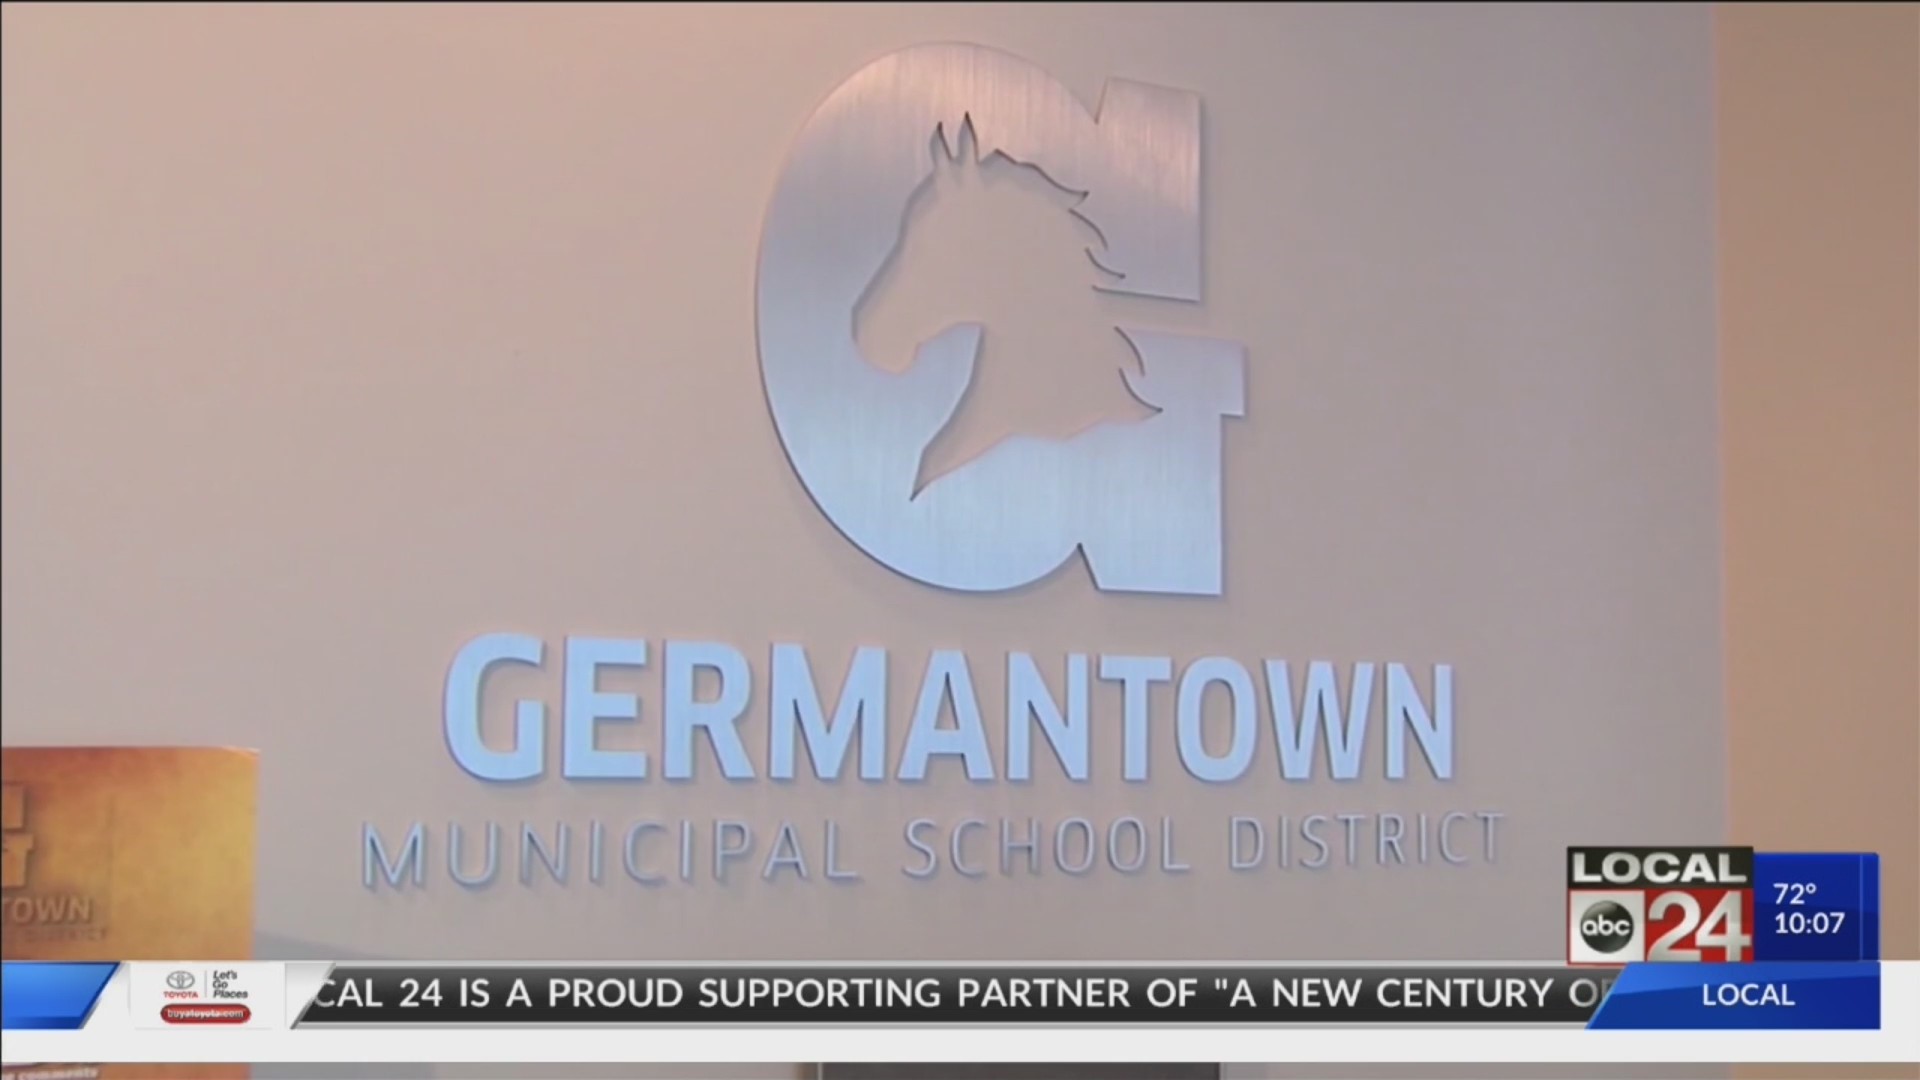 Germantown Municipal School District training staff in bullying prevention